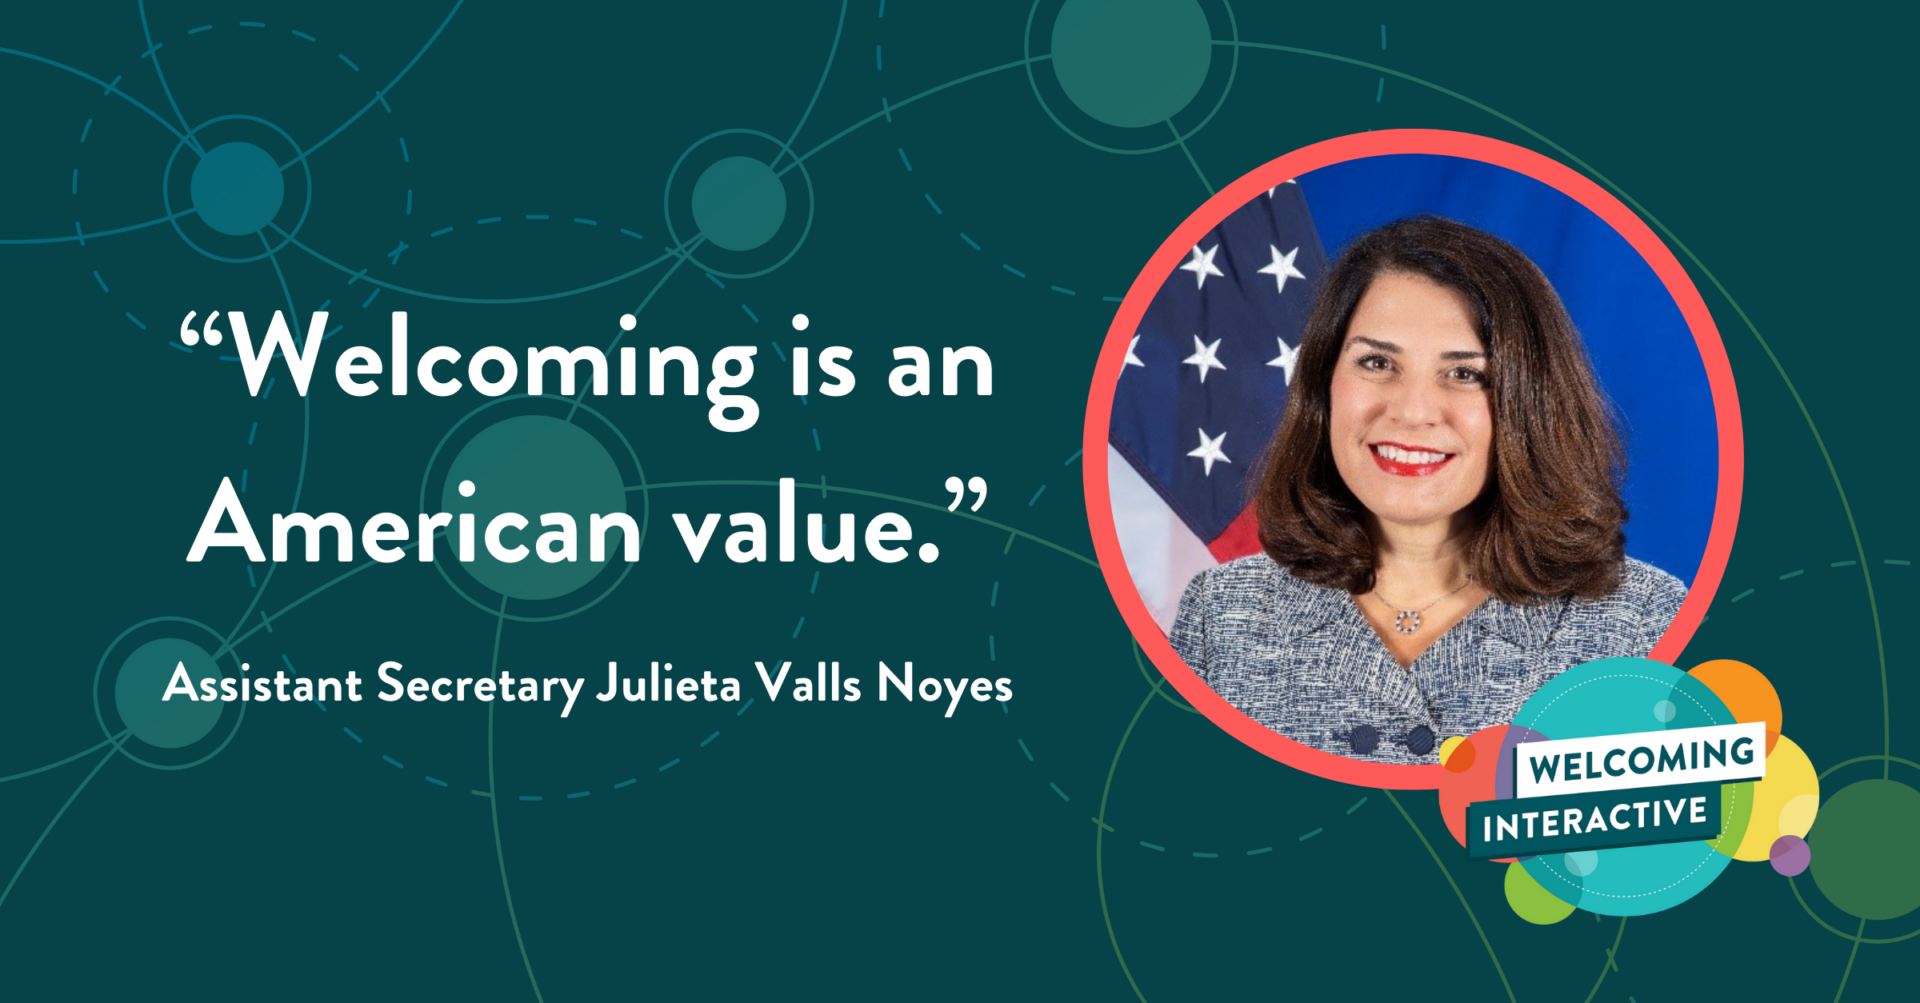 Headshot of Julieta Valls Noyes with the quote "Welcoming is an American value"